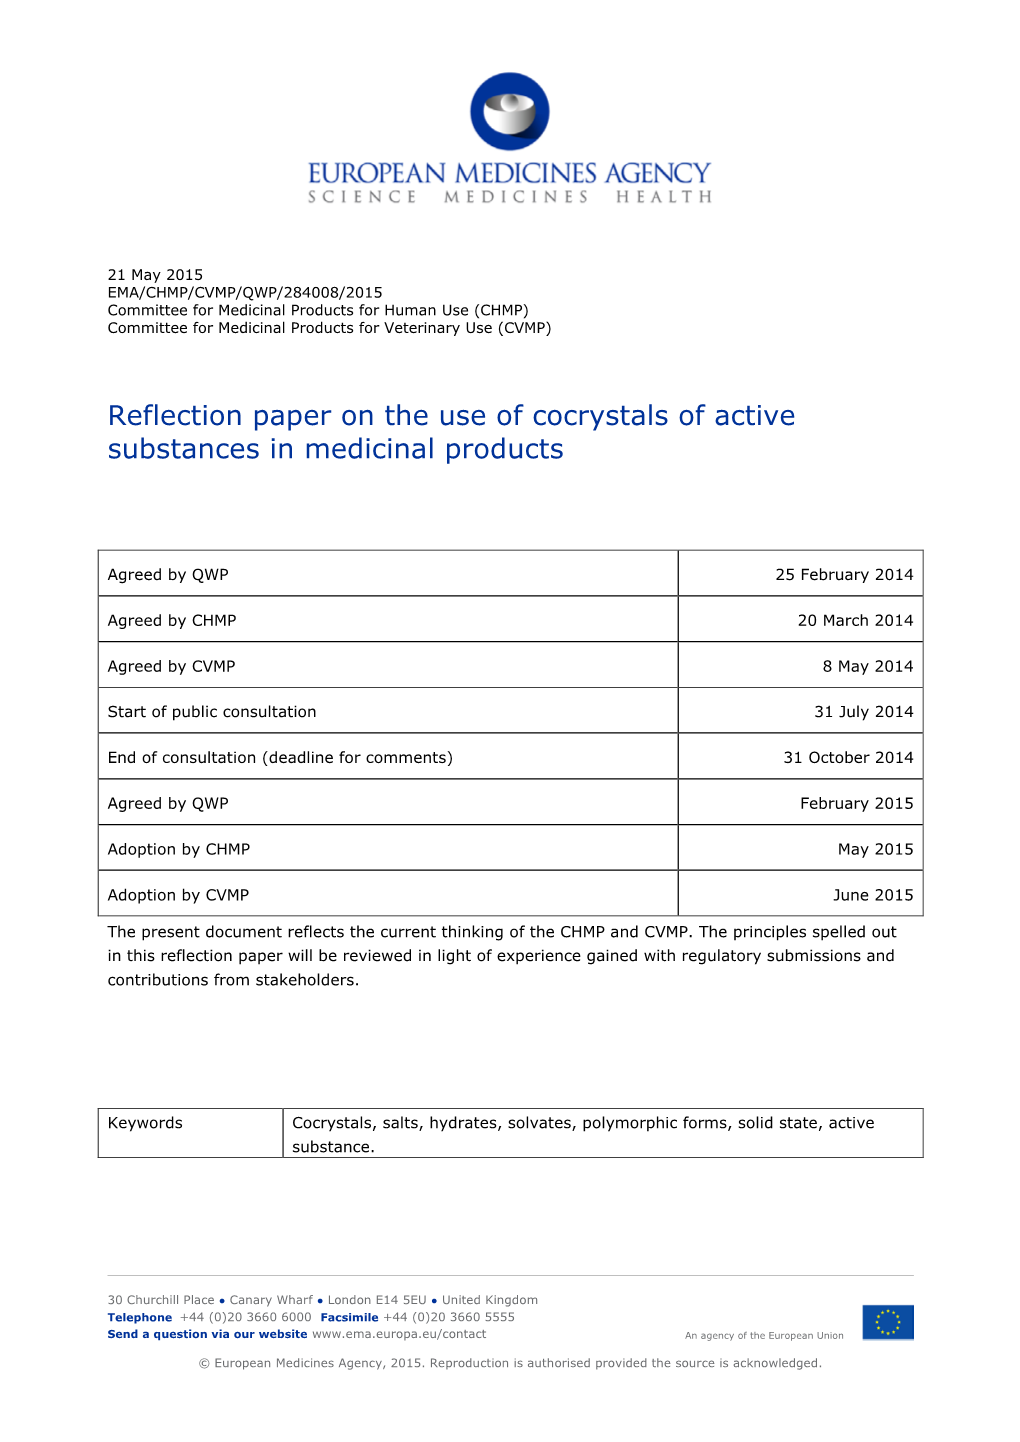 Reflection Paper on the Use of Cocrystals of Active Substances in Medicinal Products